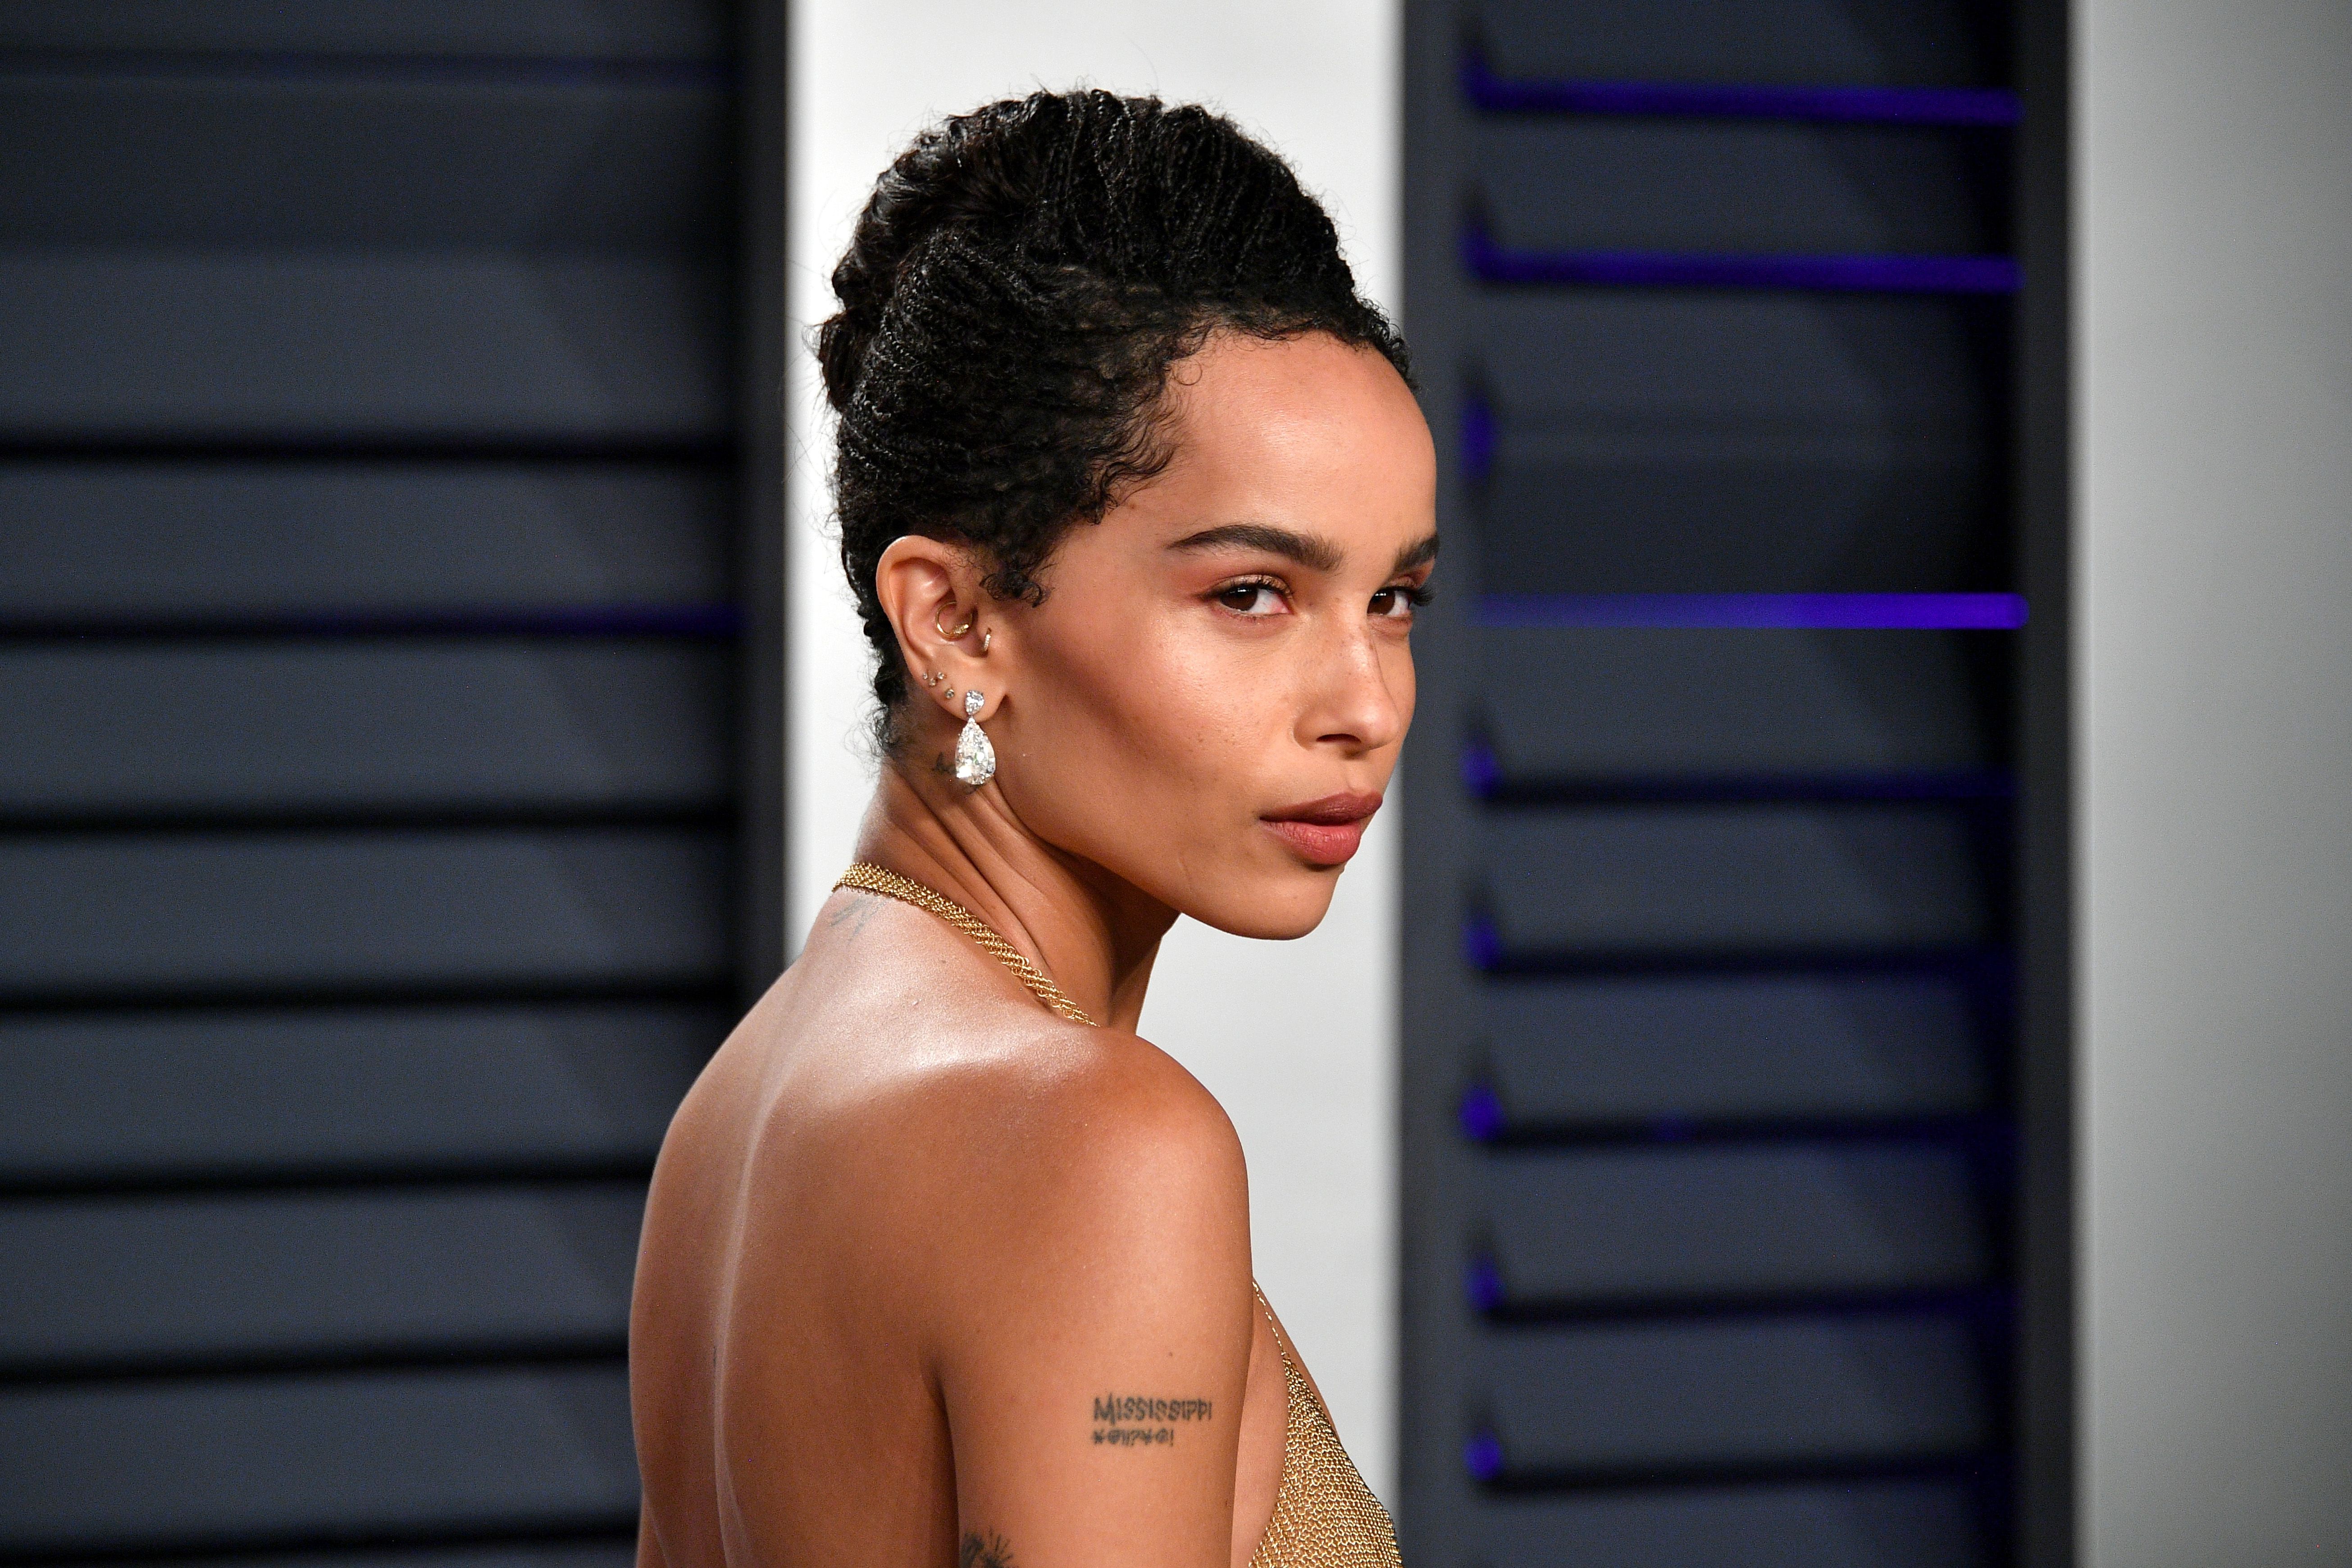 Zoe Kravitz during the Vanity Fair Oscar Party at Wallis Annenberg Center for the Performing Arts on February 24, 2019, in Beverly Hills, California. | Source: Getty Images